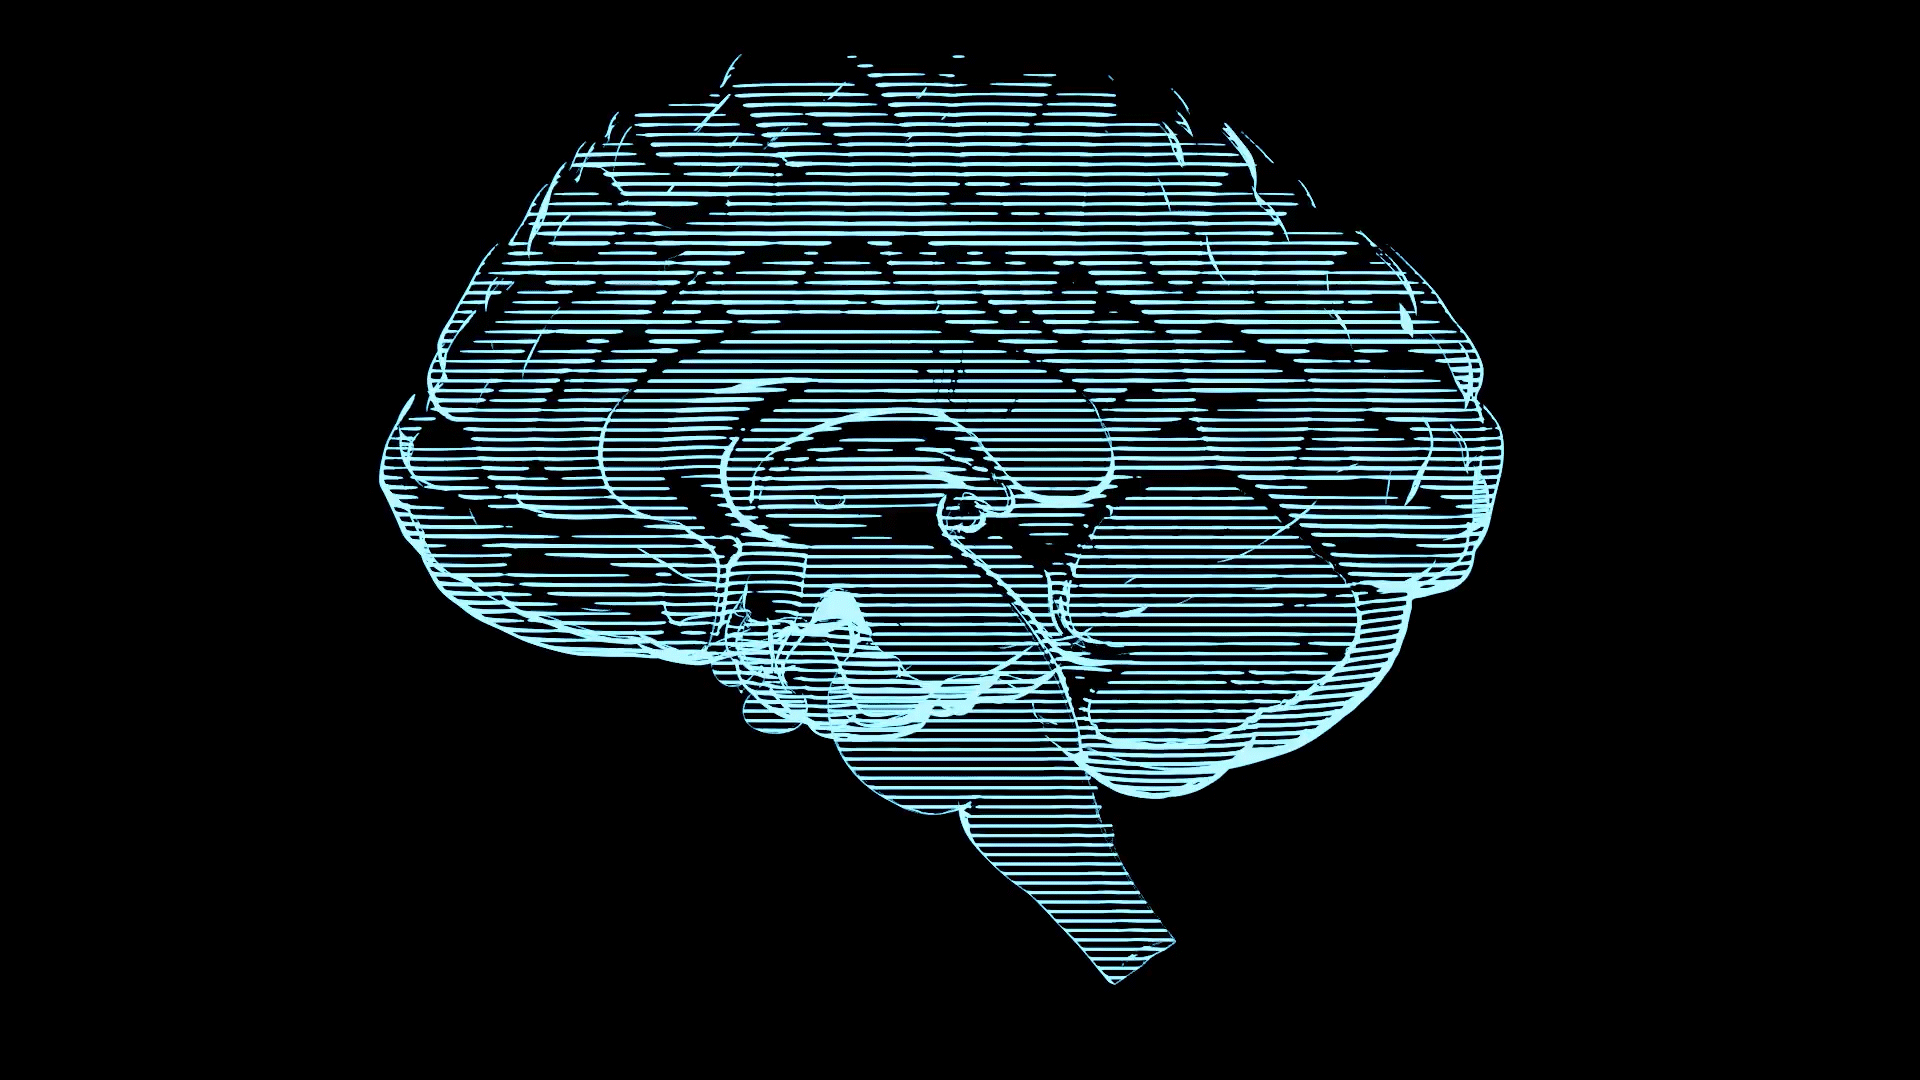 Animated holographic image of a brain